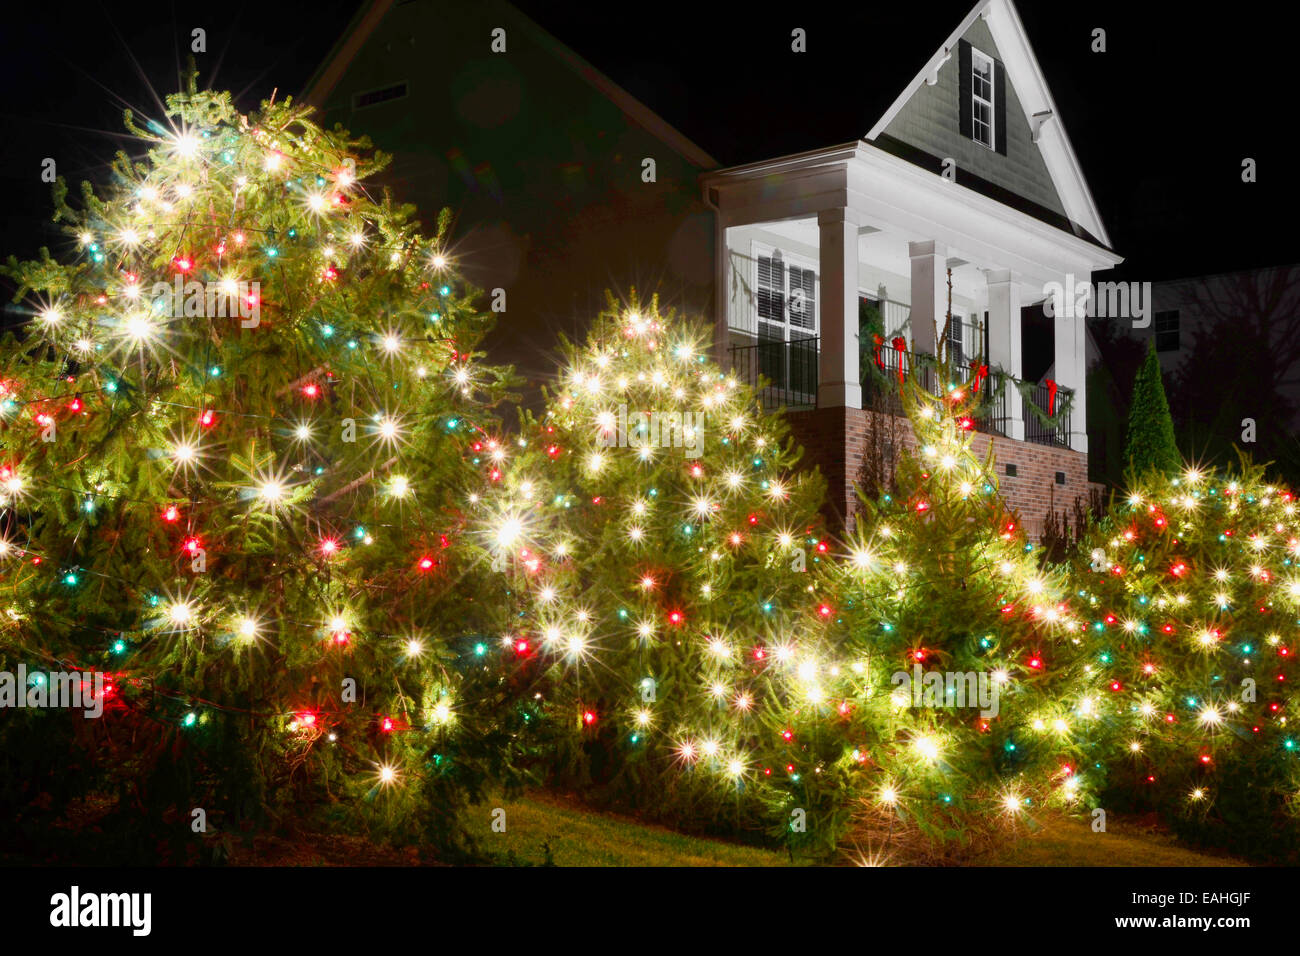 Outdoor Christmas Trees have been decorated with red, green and white  lights and shot against a Victorian style home Stock Photo - Alamy